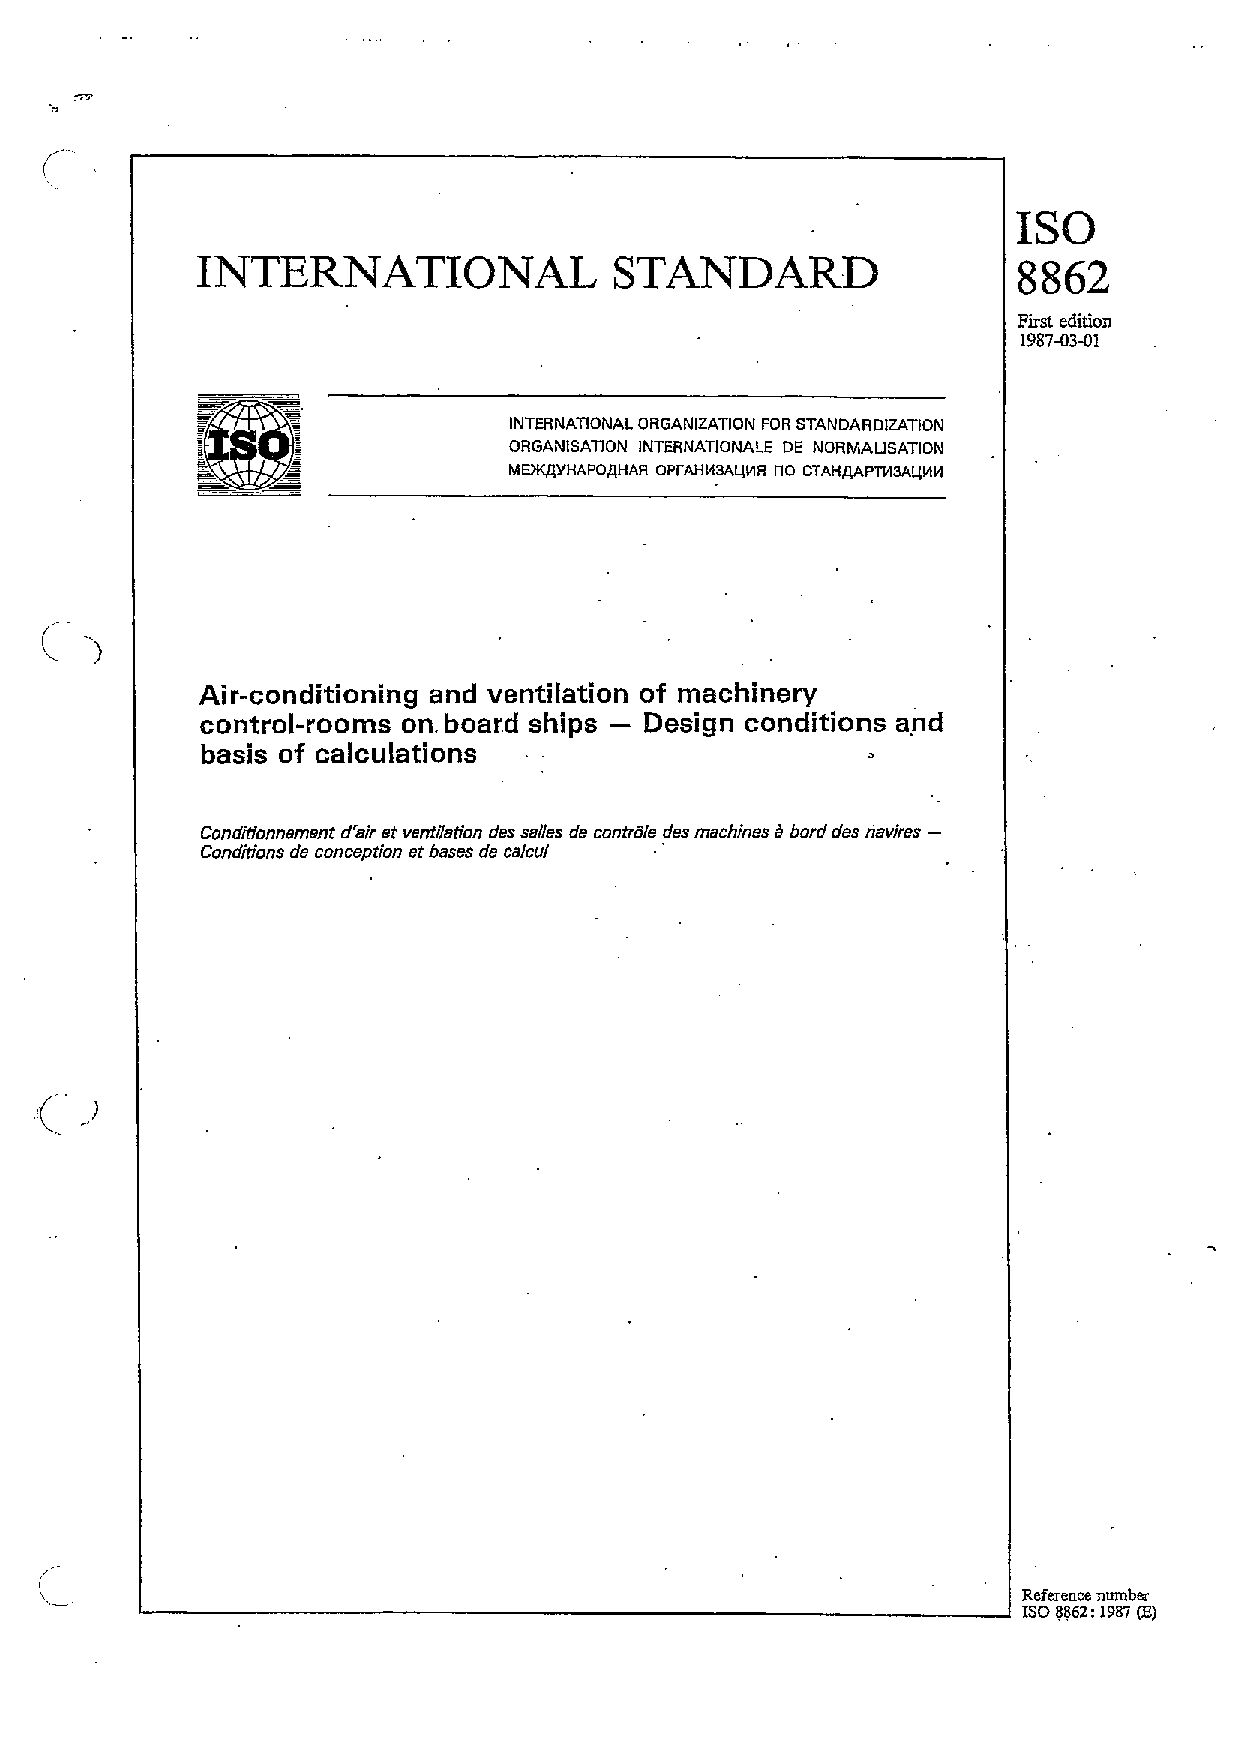 ISO 8862:1987